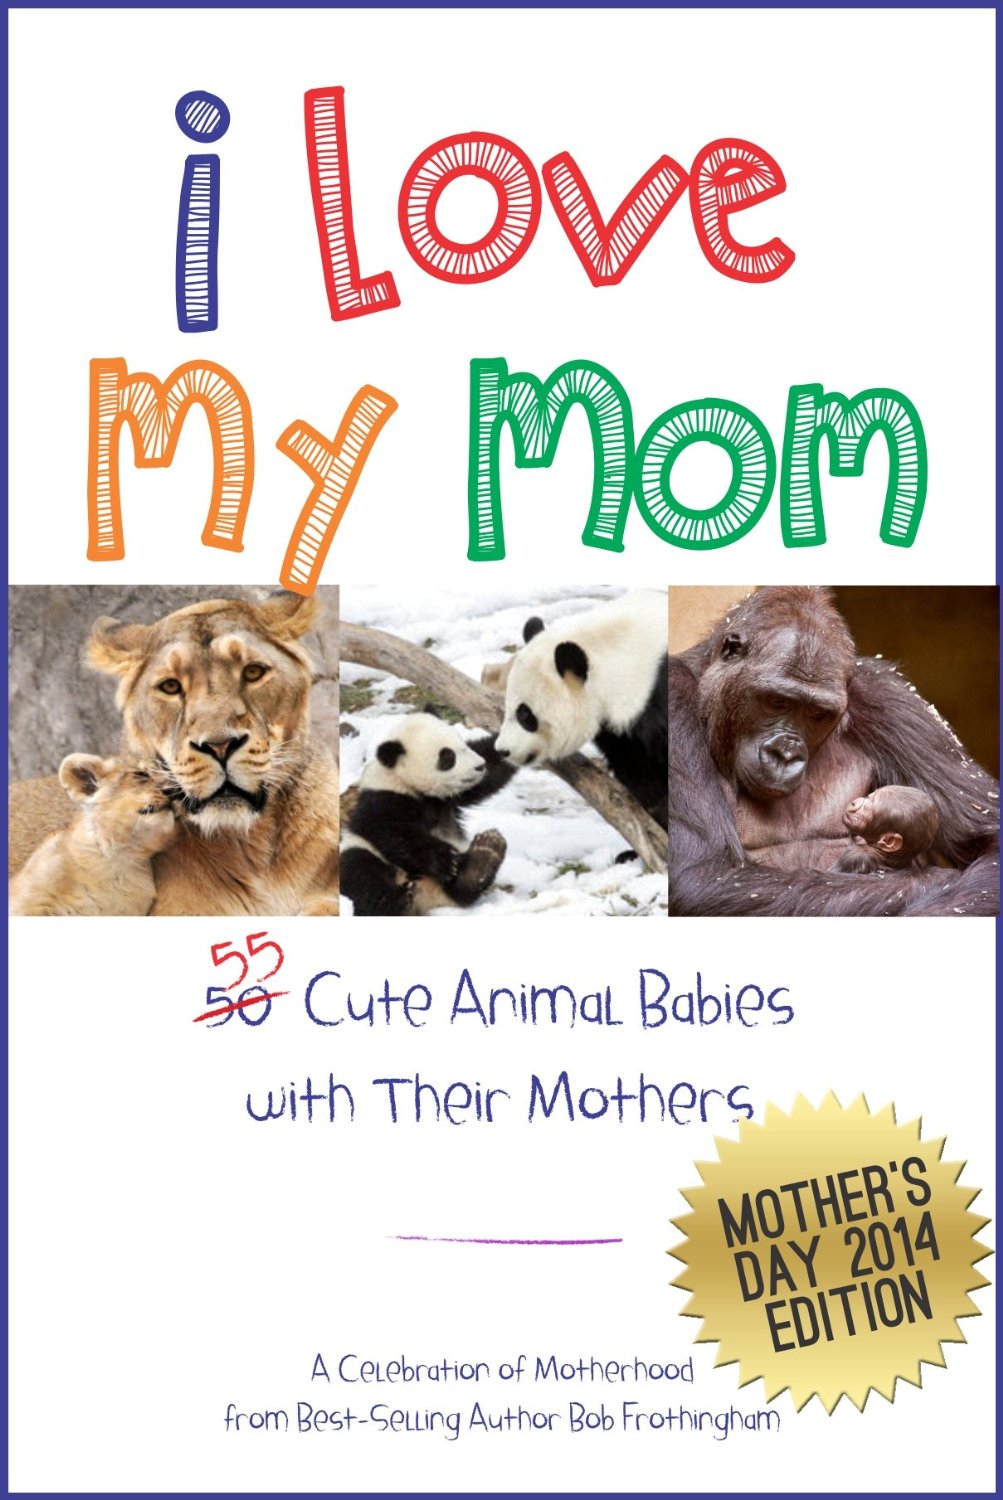 I Love My Mom – Over 50 Cute Animal Babies with Their Mothers by Bob Frothingham